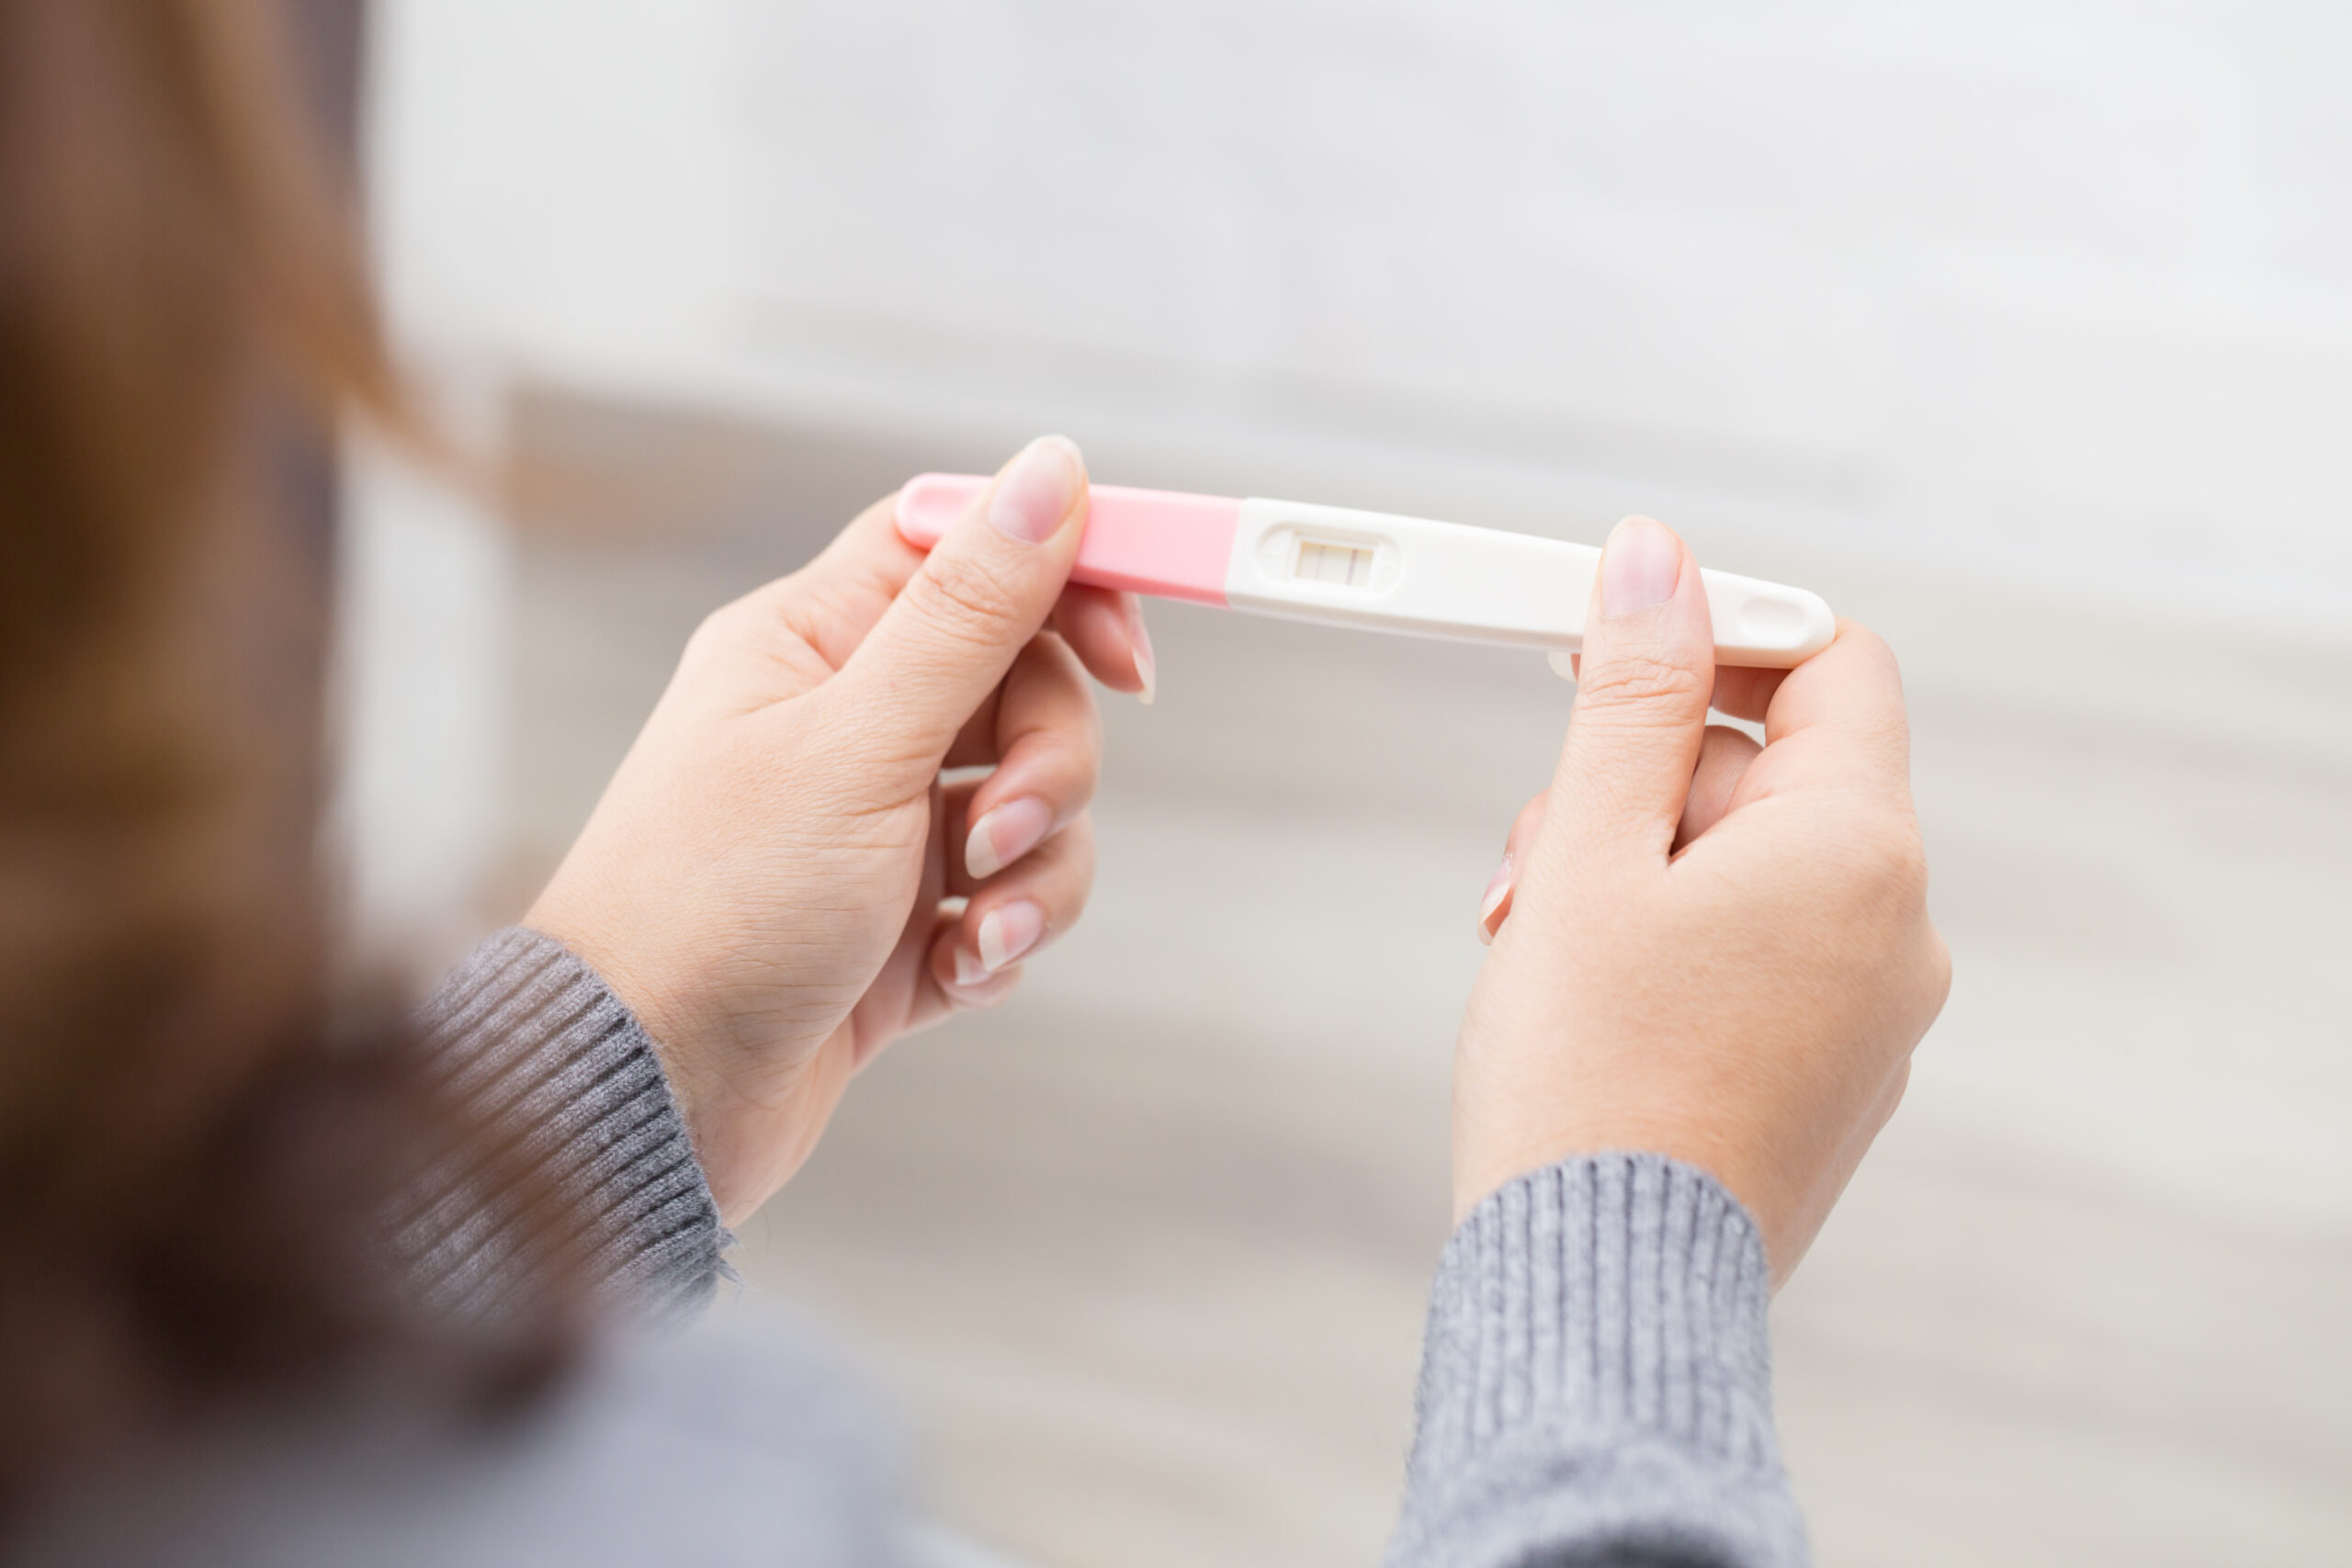 How do home pregnancy tests work?